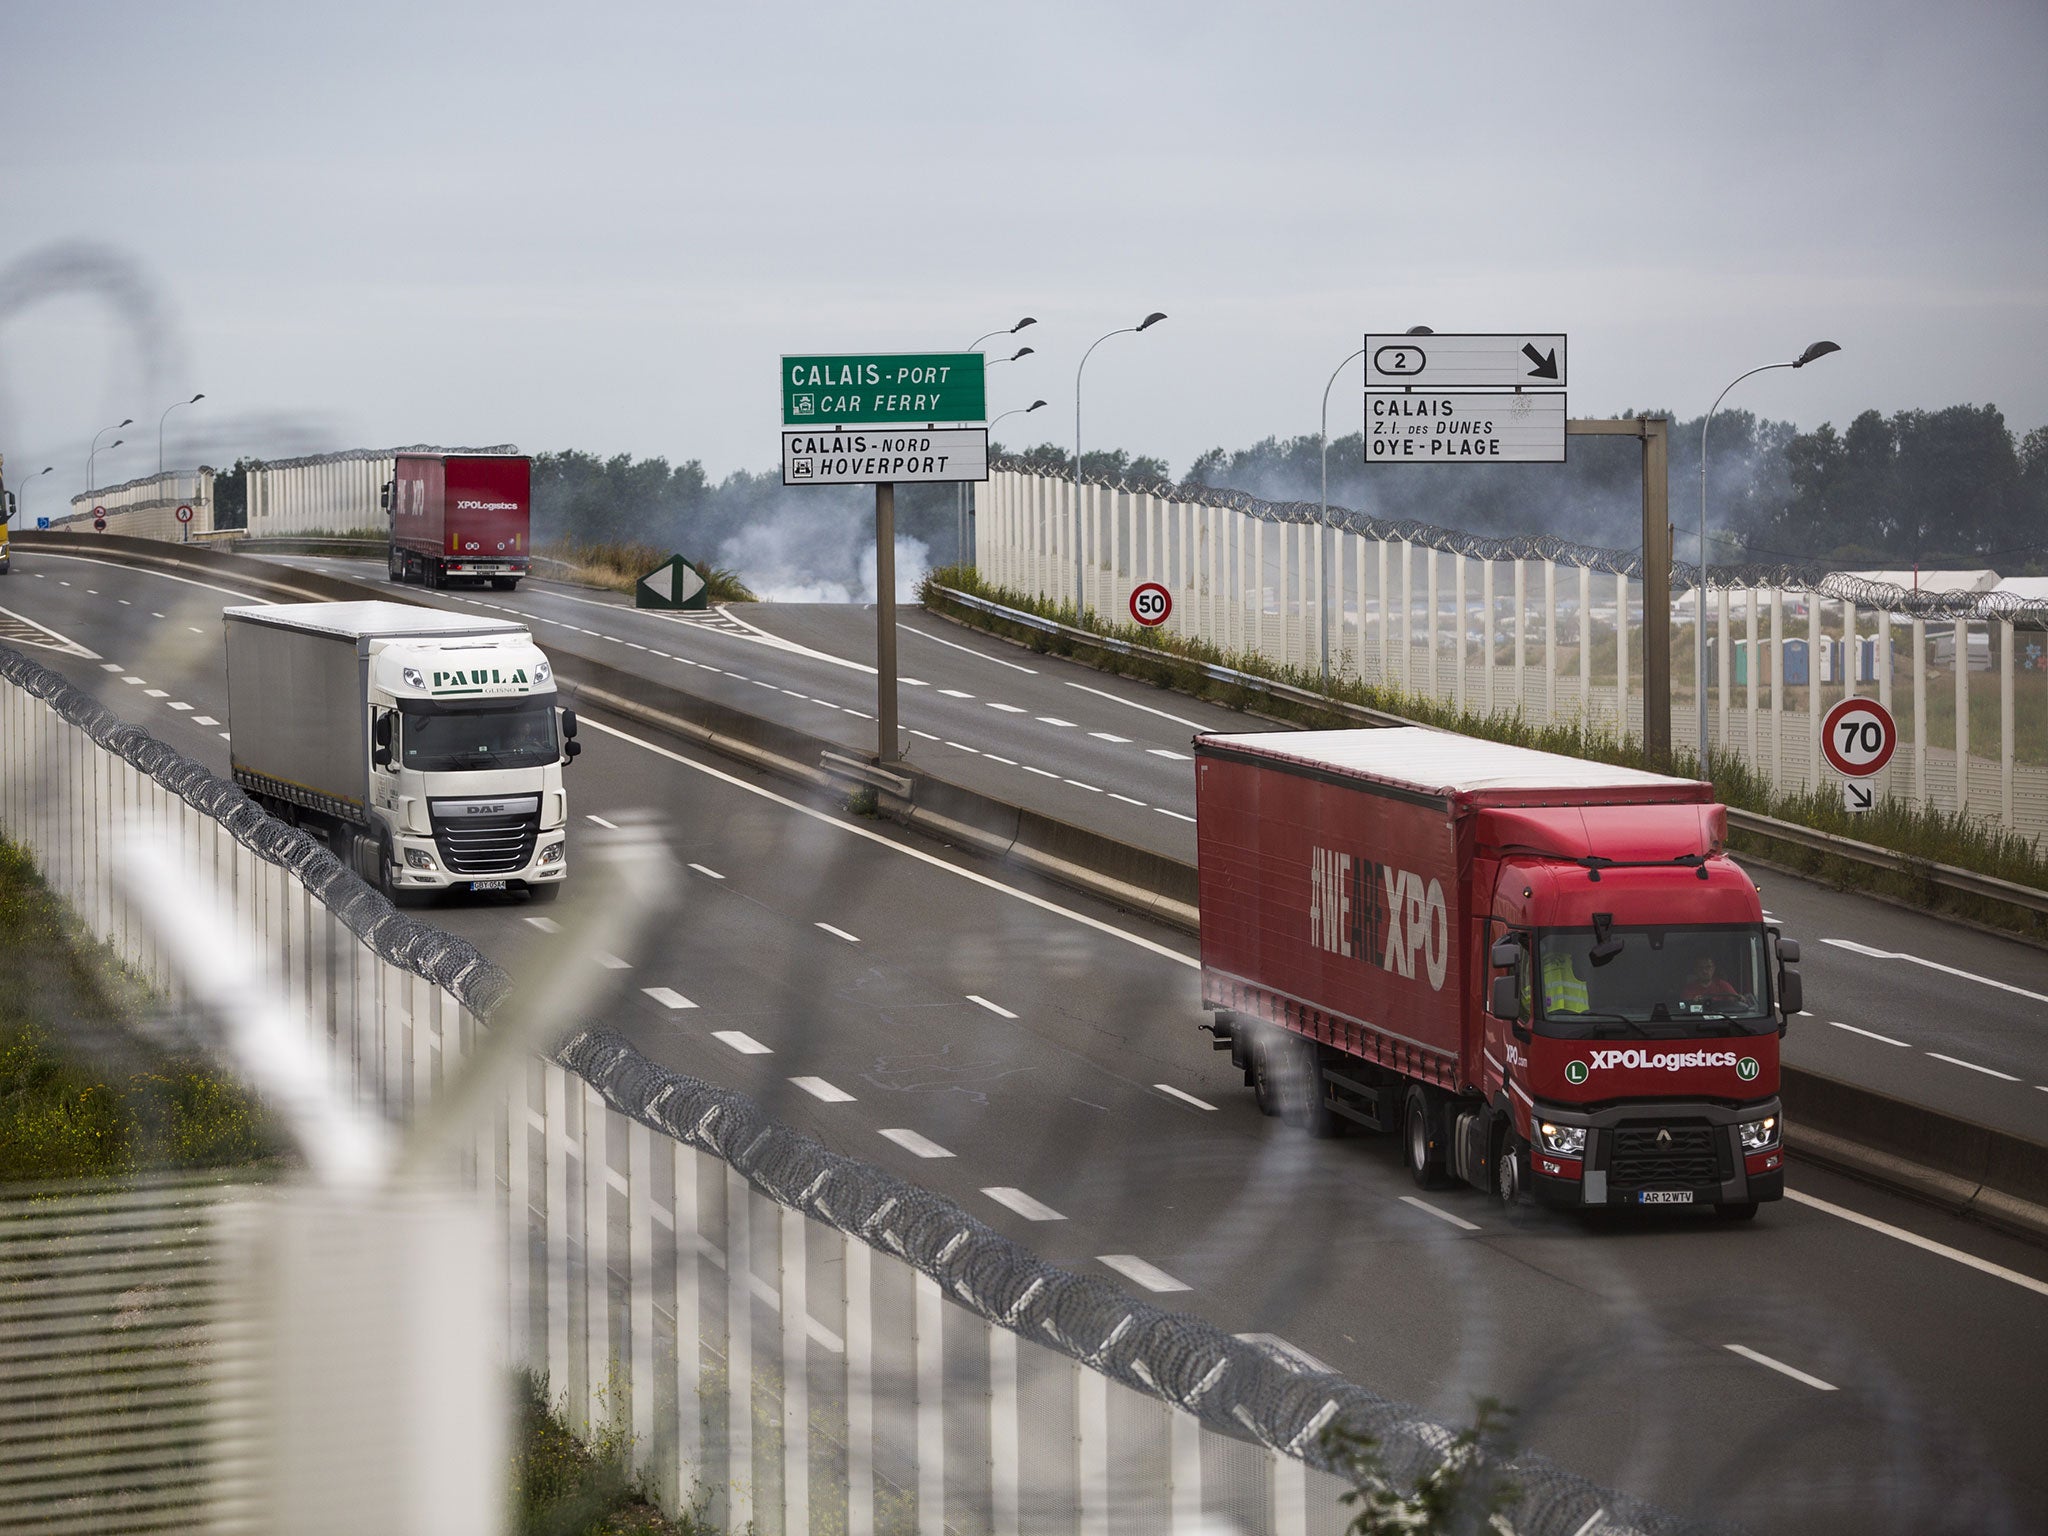 The Road Haulage Association believes that security levels need to be improved on the surrounding approach roads to Calais